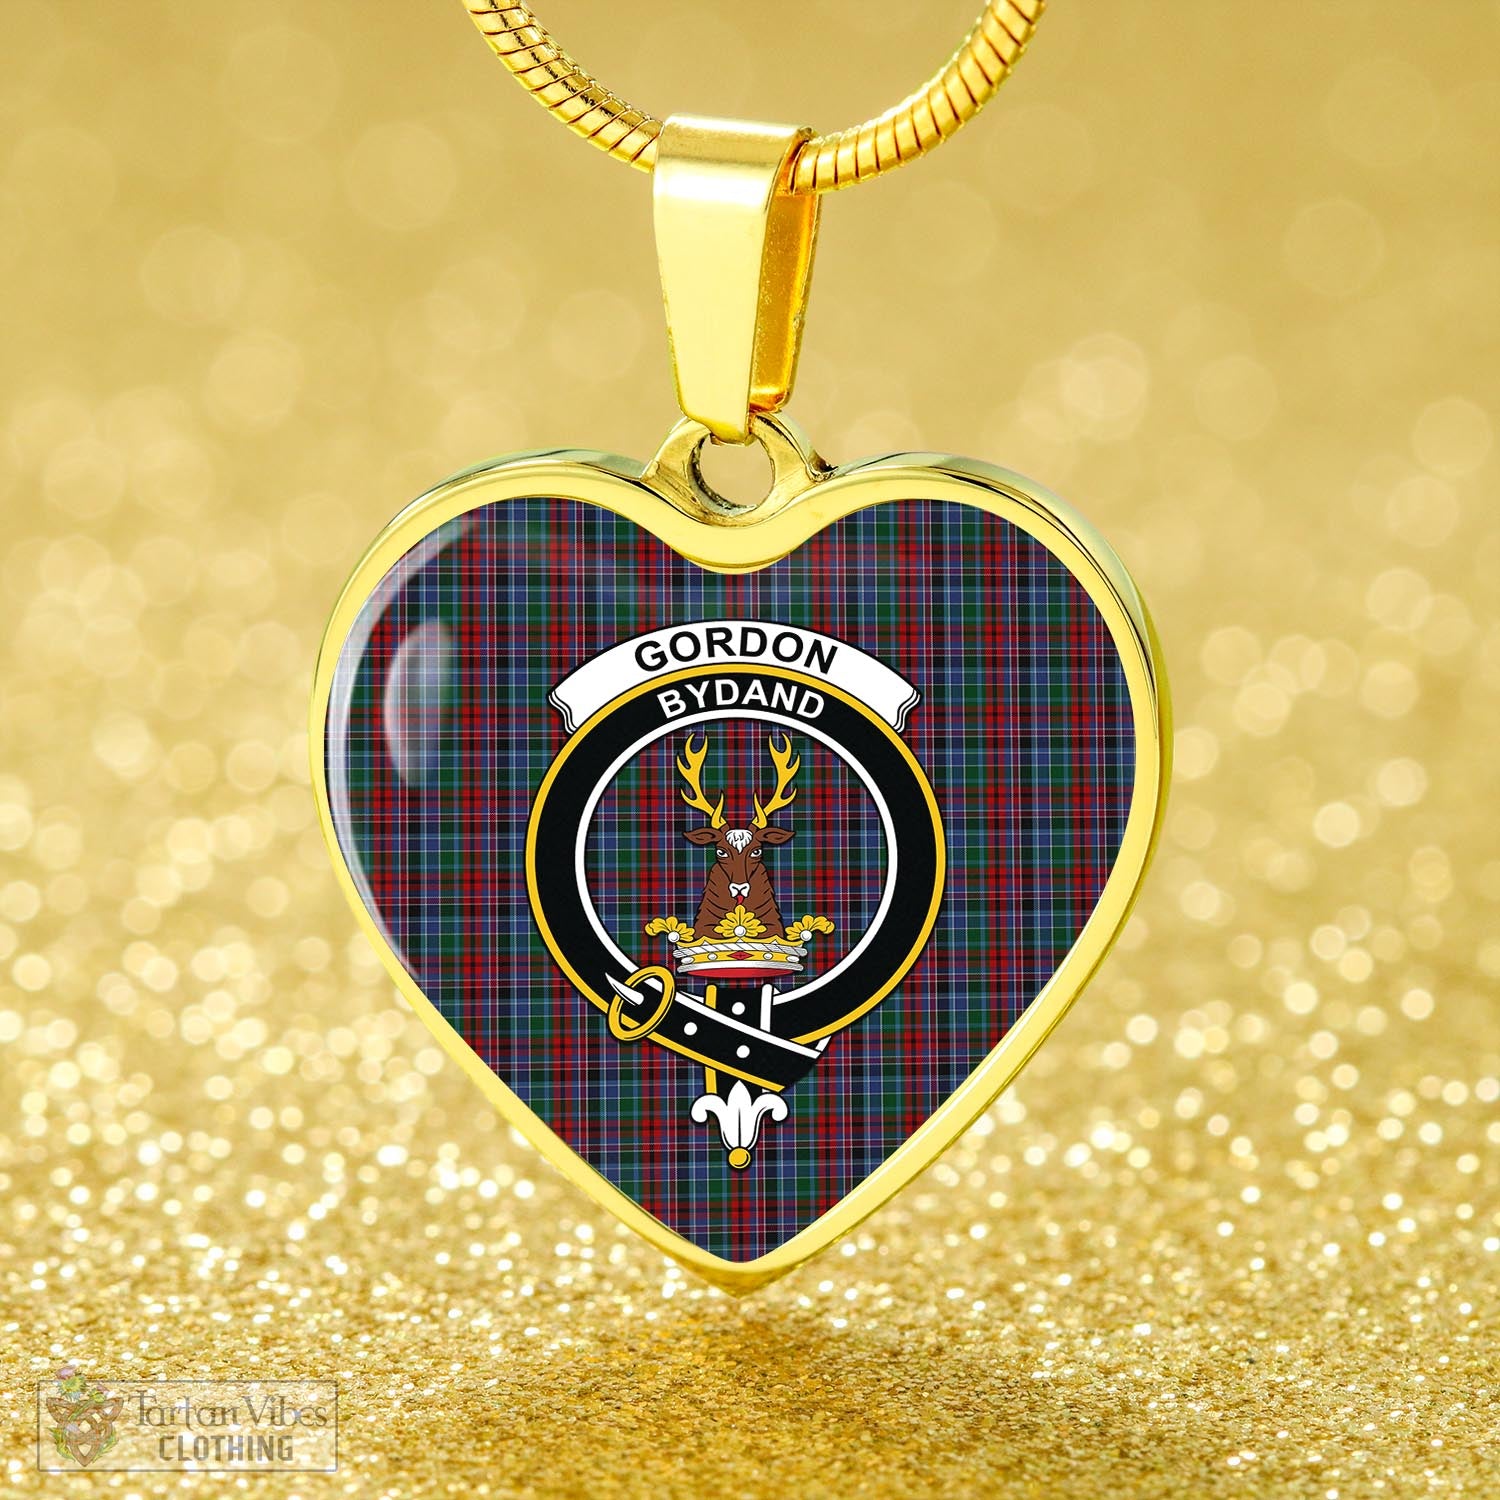 Tartan Vibes Clothing Gordon Red Tartan Heart Necklace with Family Crest